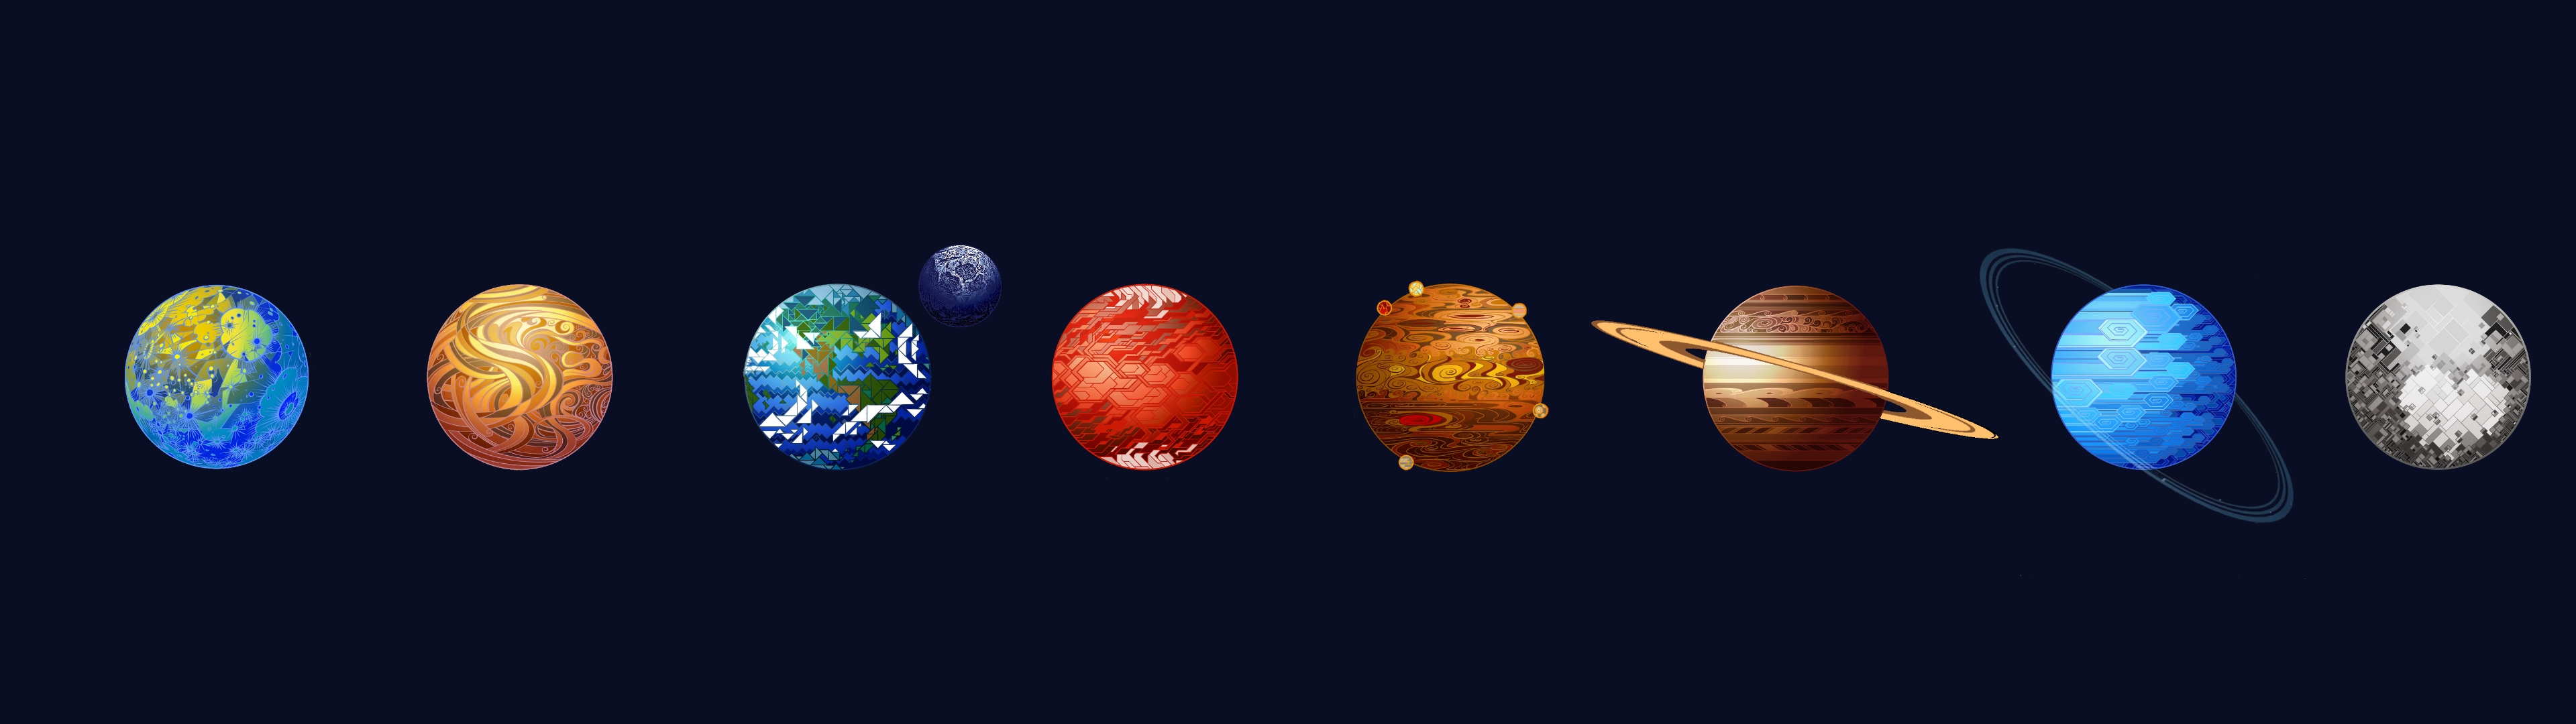 I Made A Out Of The Breath Art - Solar System Facebook Cover , HD Wallpaper & Backgrounds